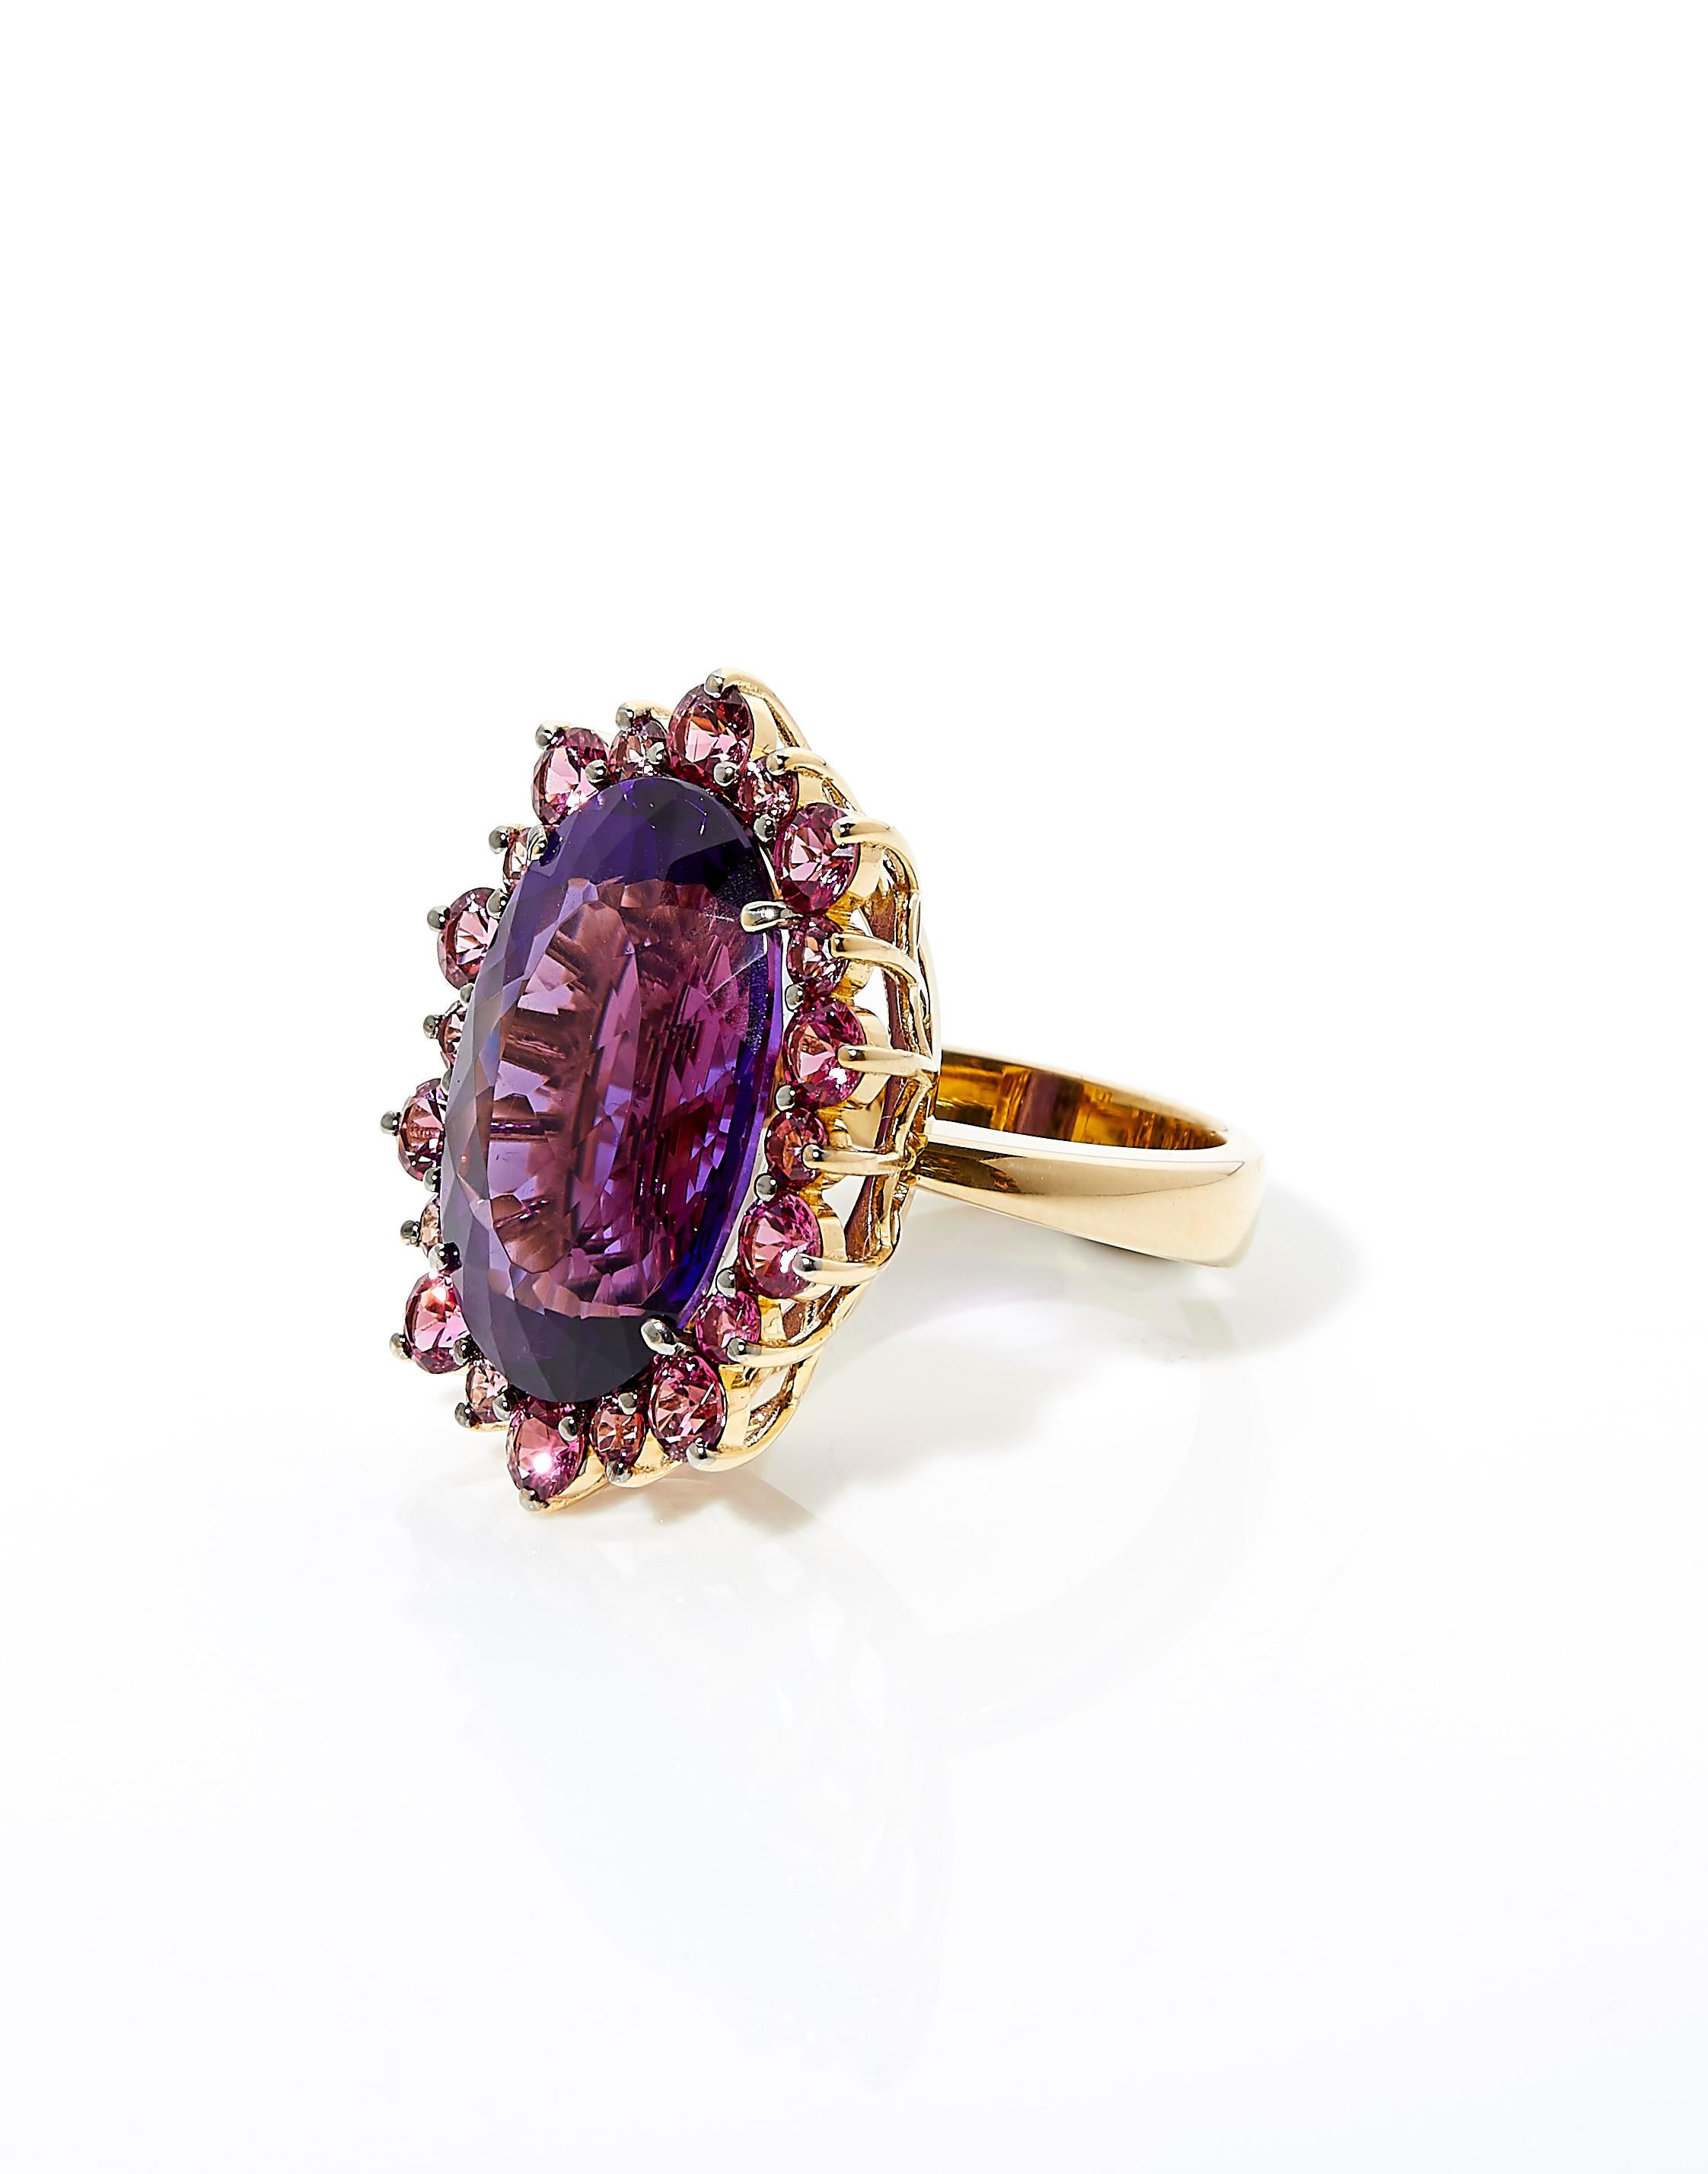 Brilliant Cut 18 Karat Yellow Gold Cocktail Ring Set with 15.73 Carat Amethyst and Spinels For Sale